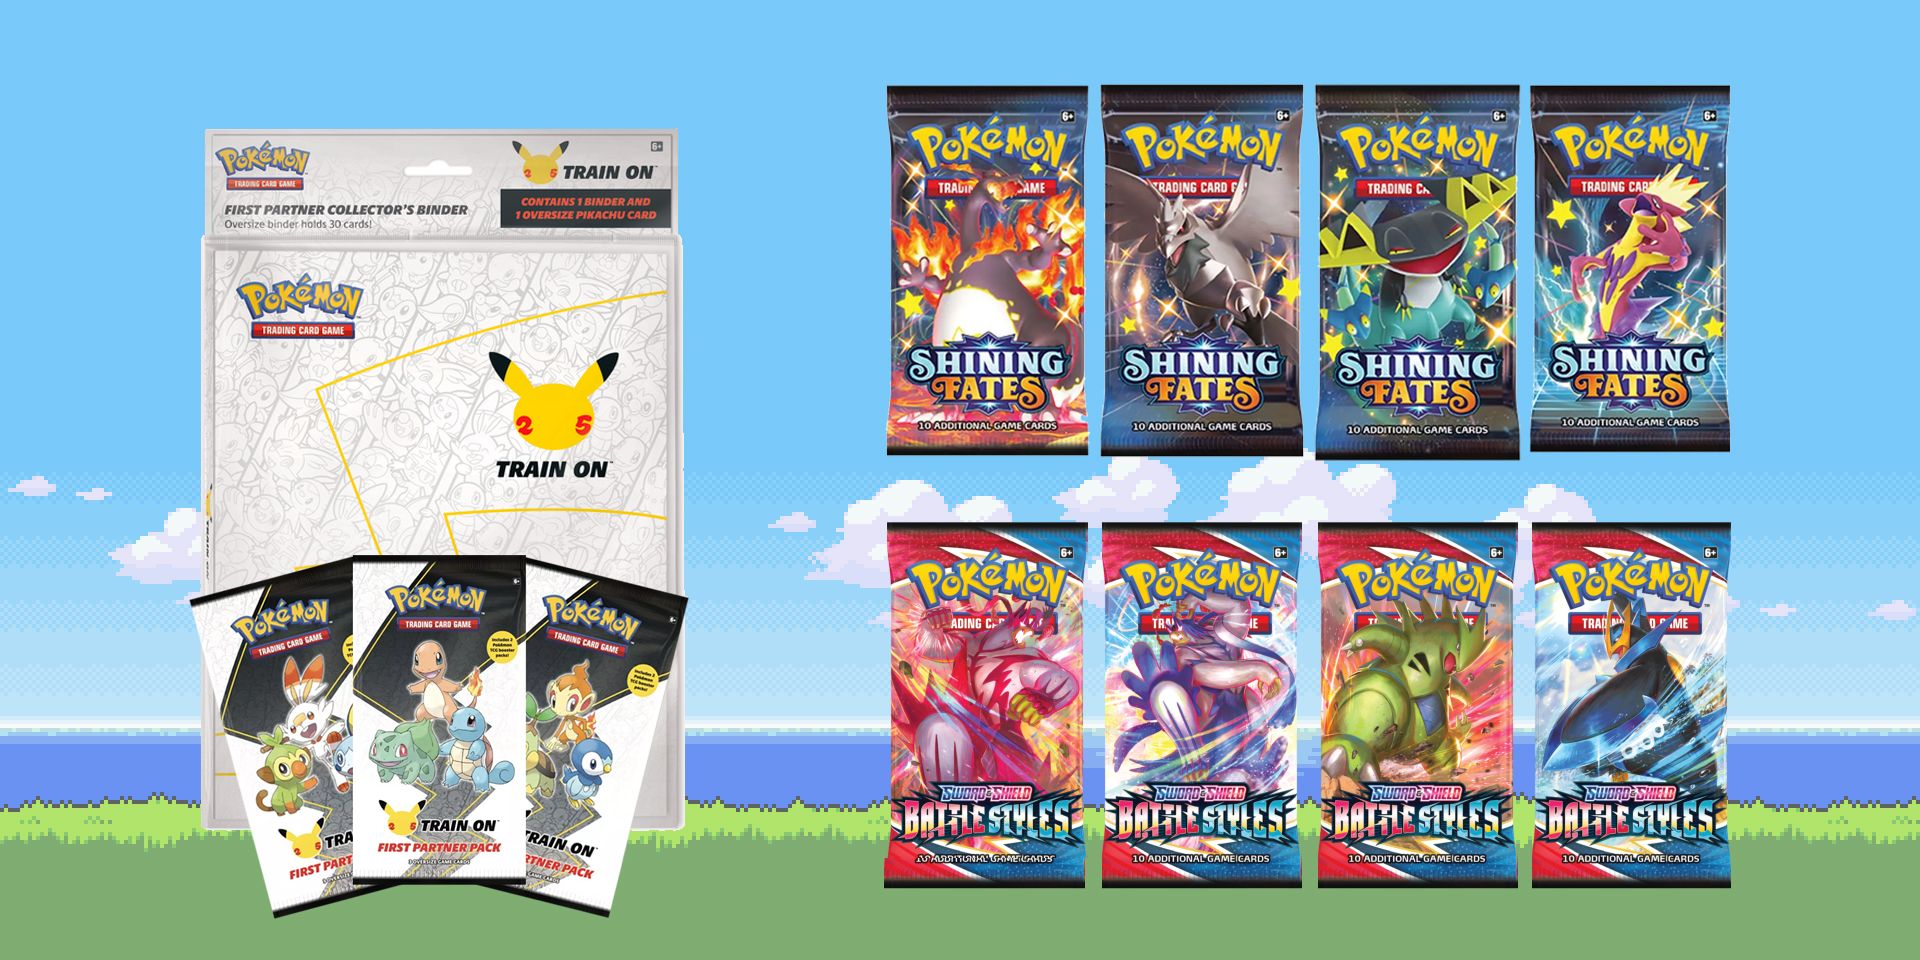 Some of the new sets coming to the Pokemon trading card game in 2021